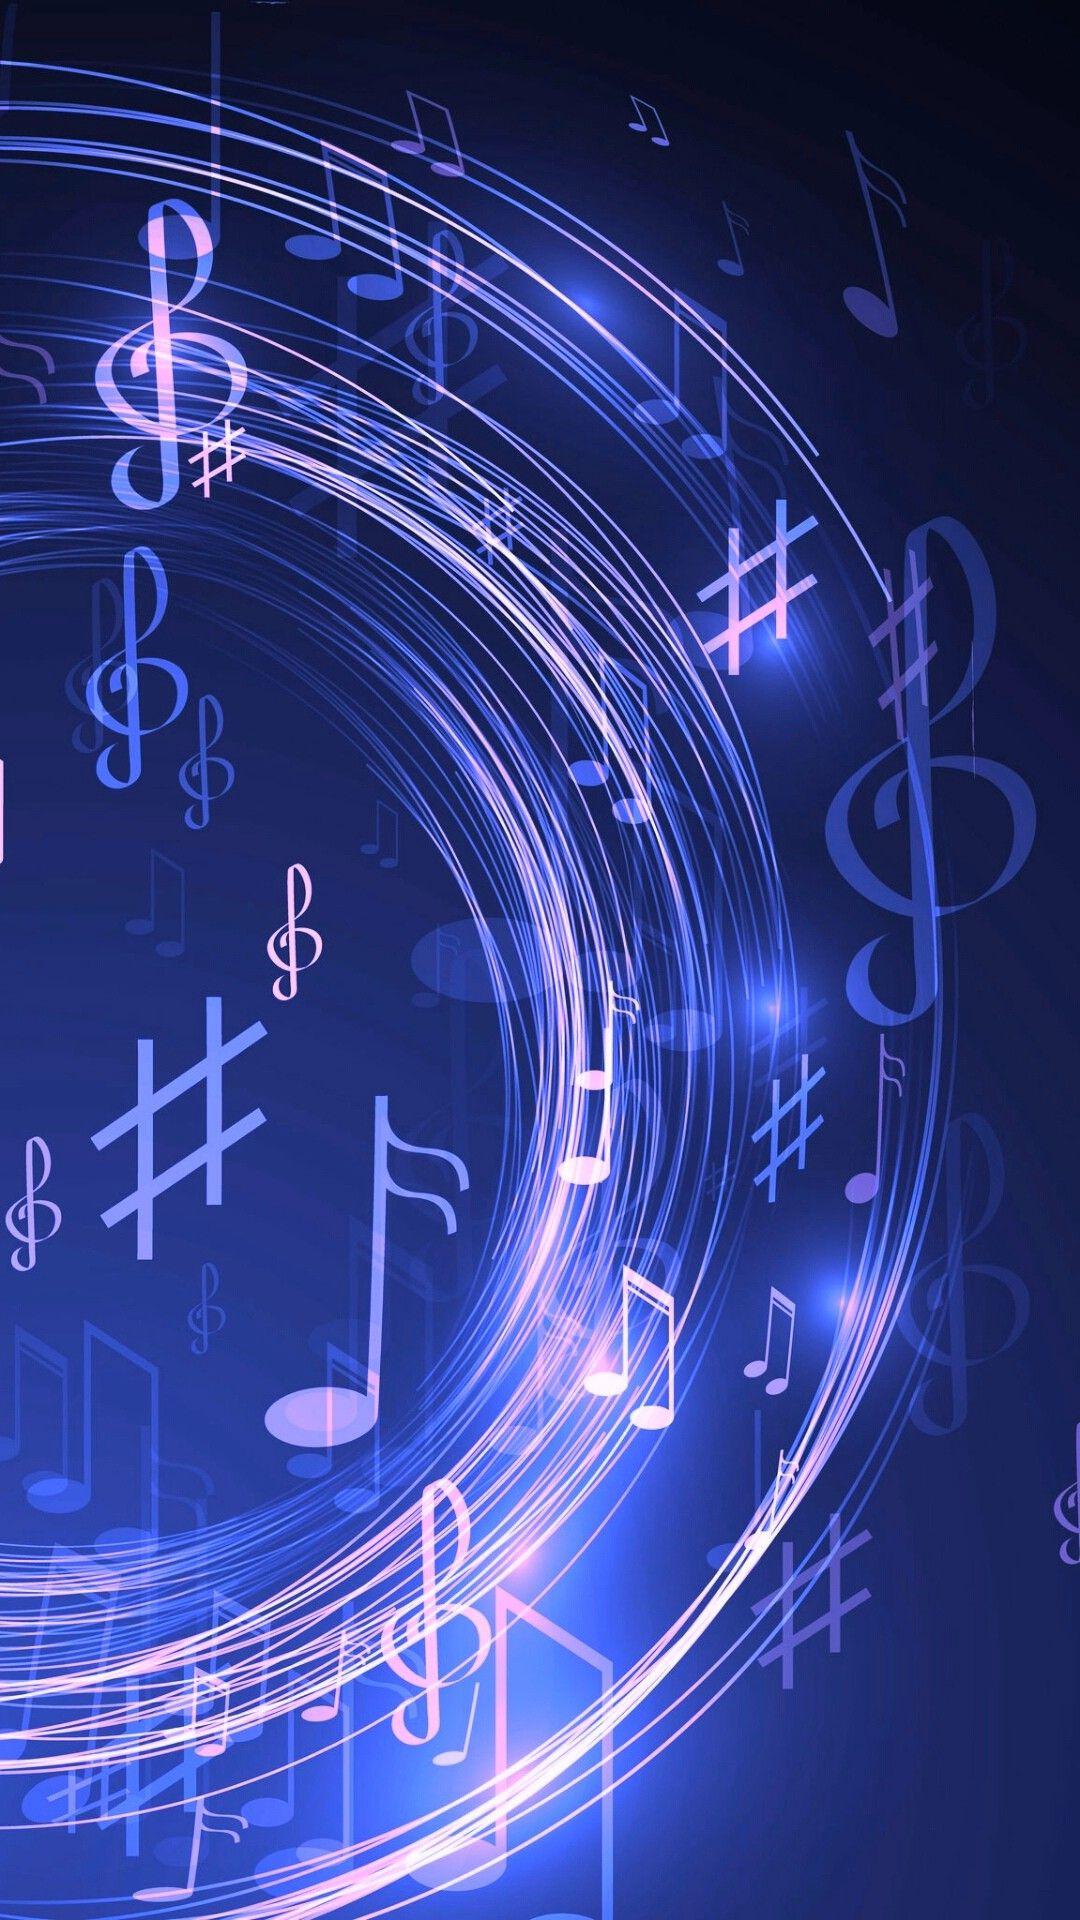 Music Wallpaper. Music picture